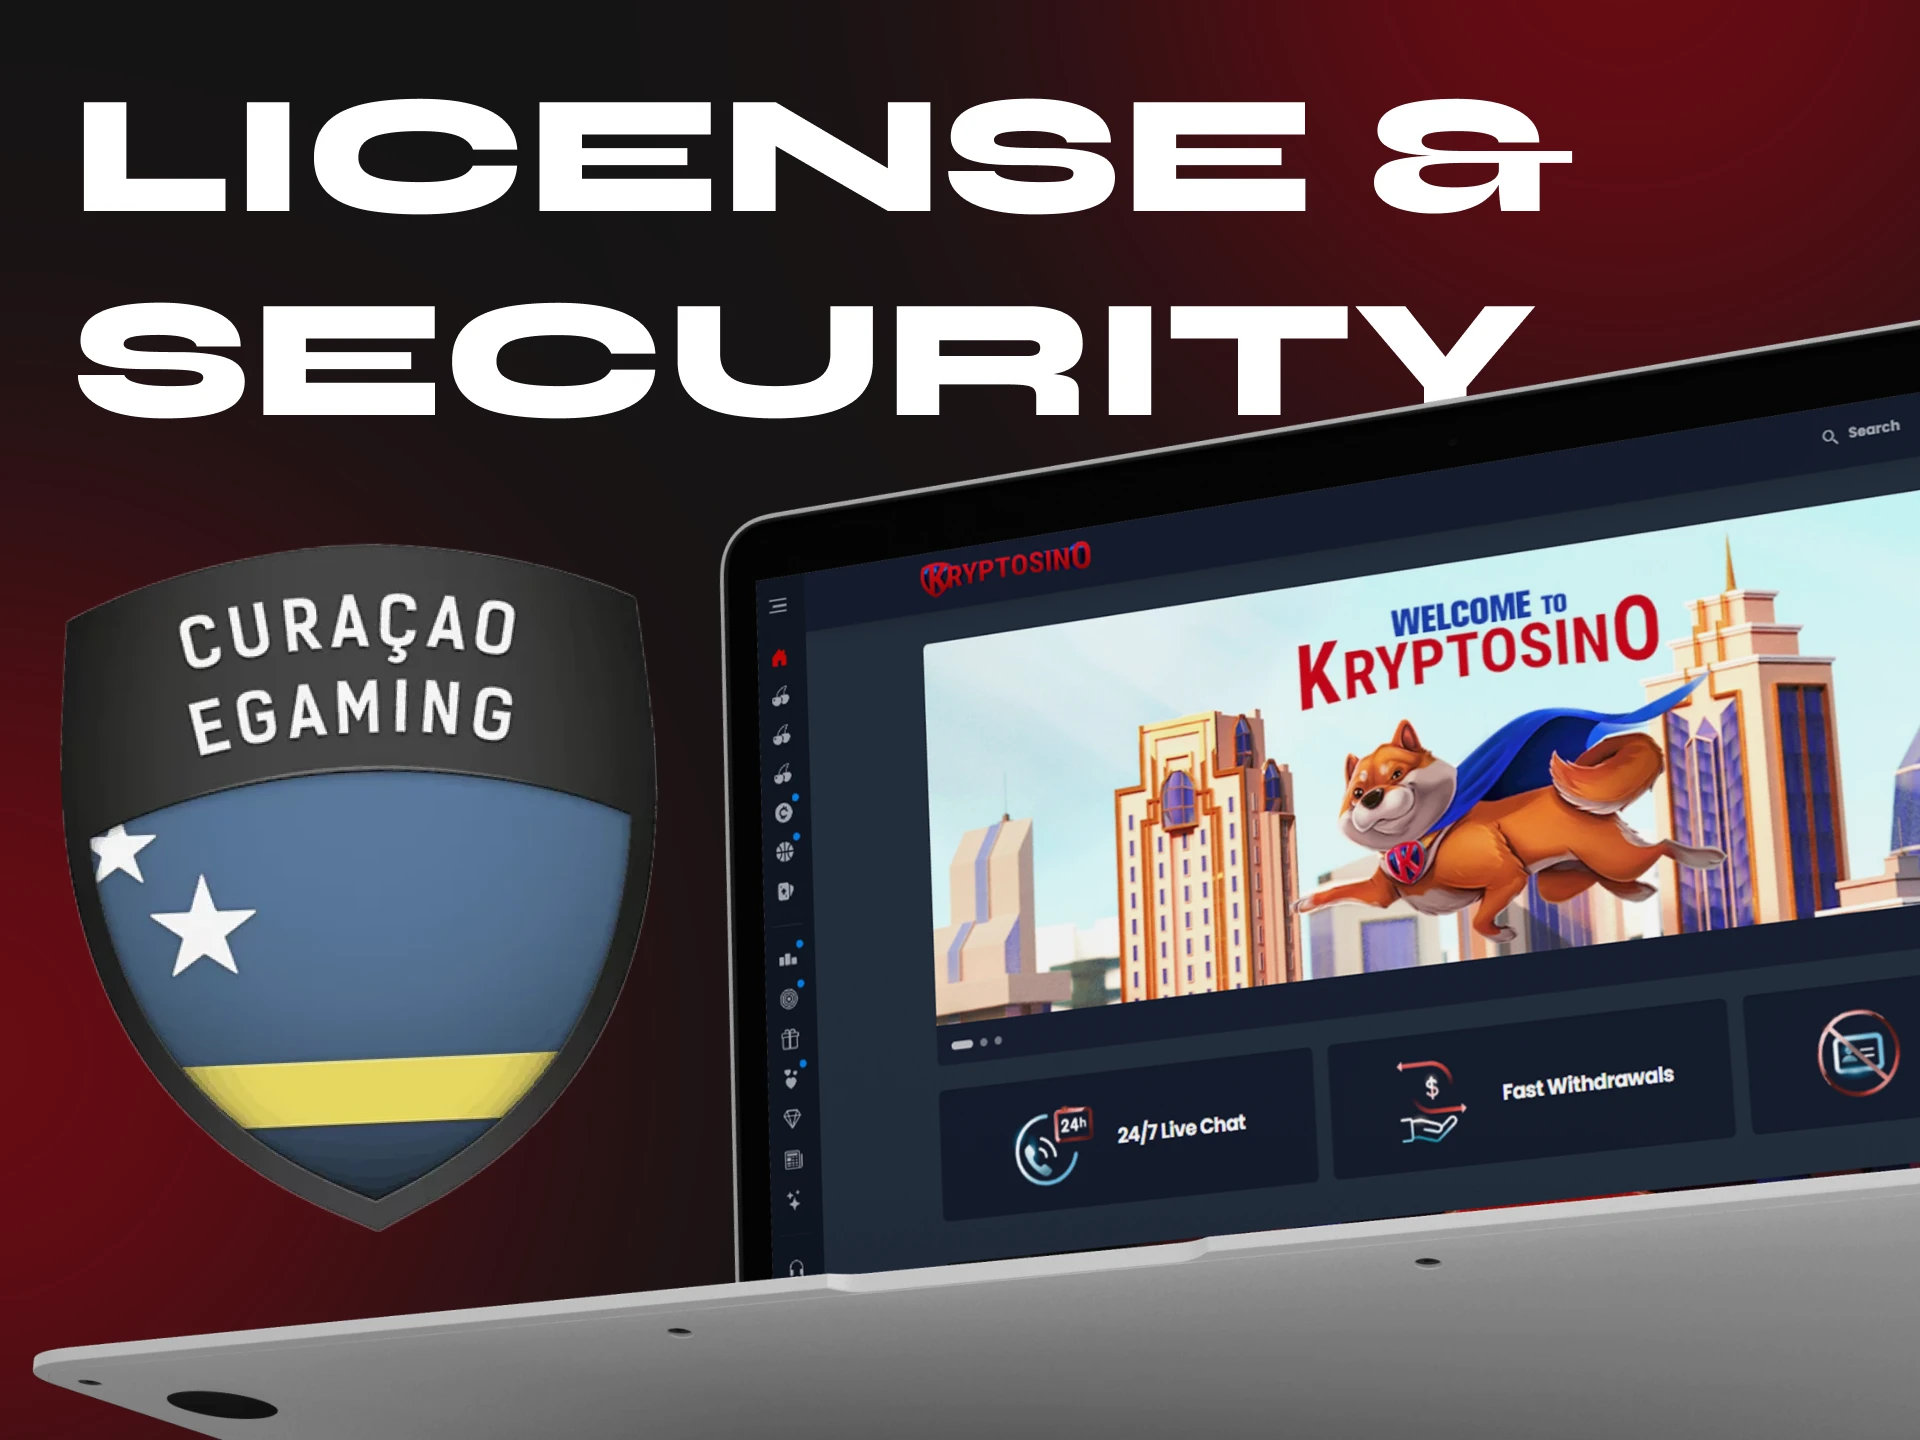 Kyptosino casino is licensed and absolutely safe.